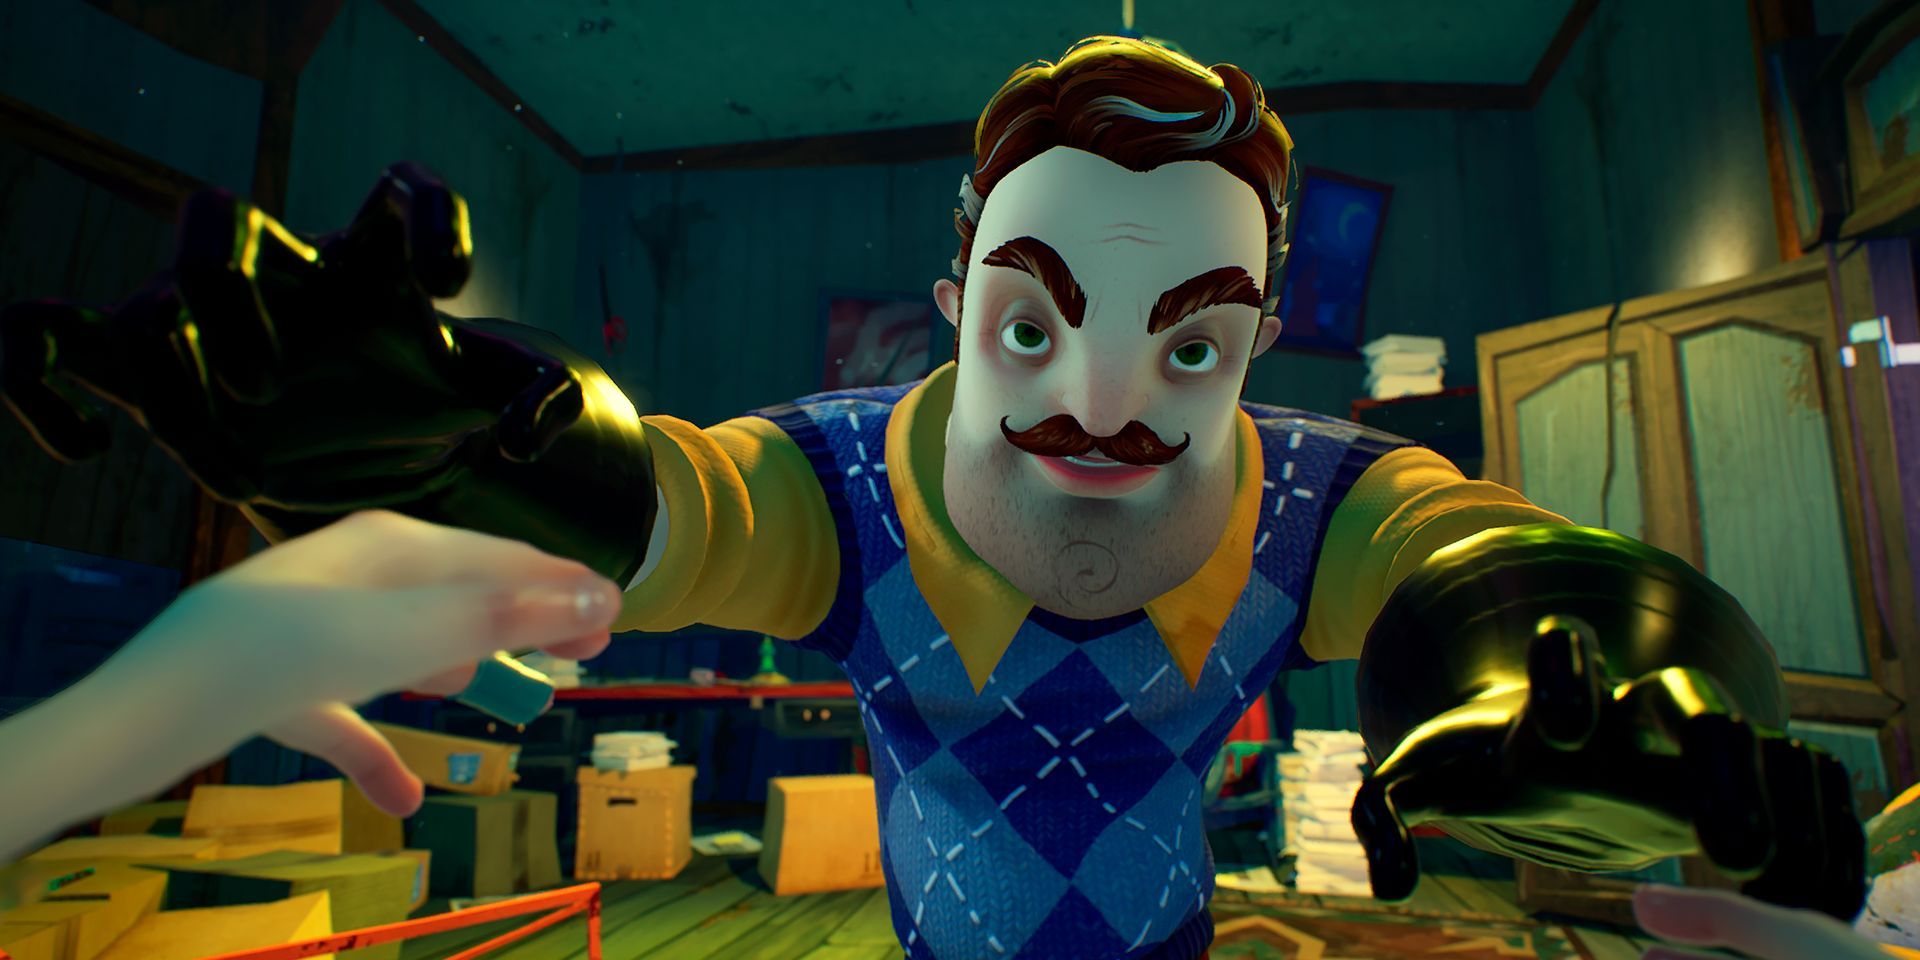 A screenshot from Hello Neighbor 2 in which the3 player is about to get caught